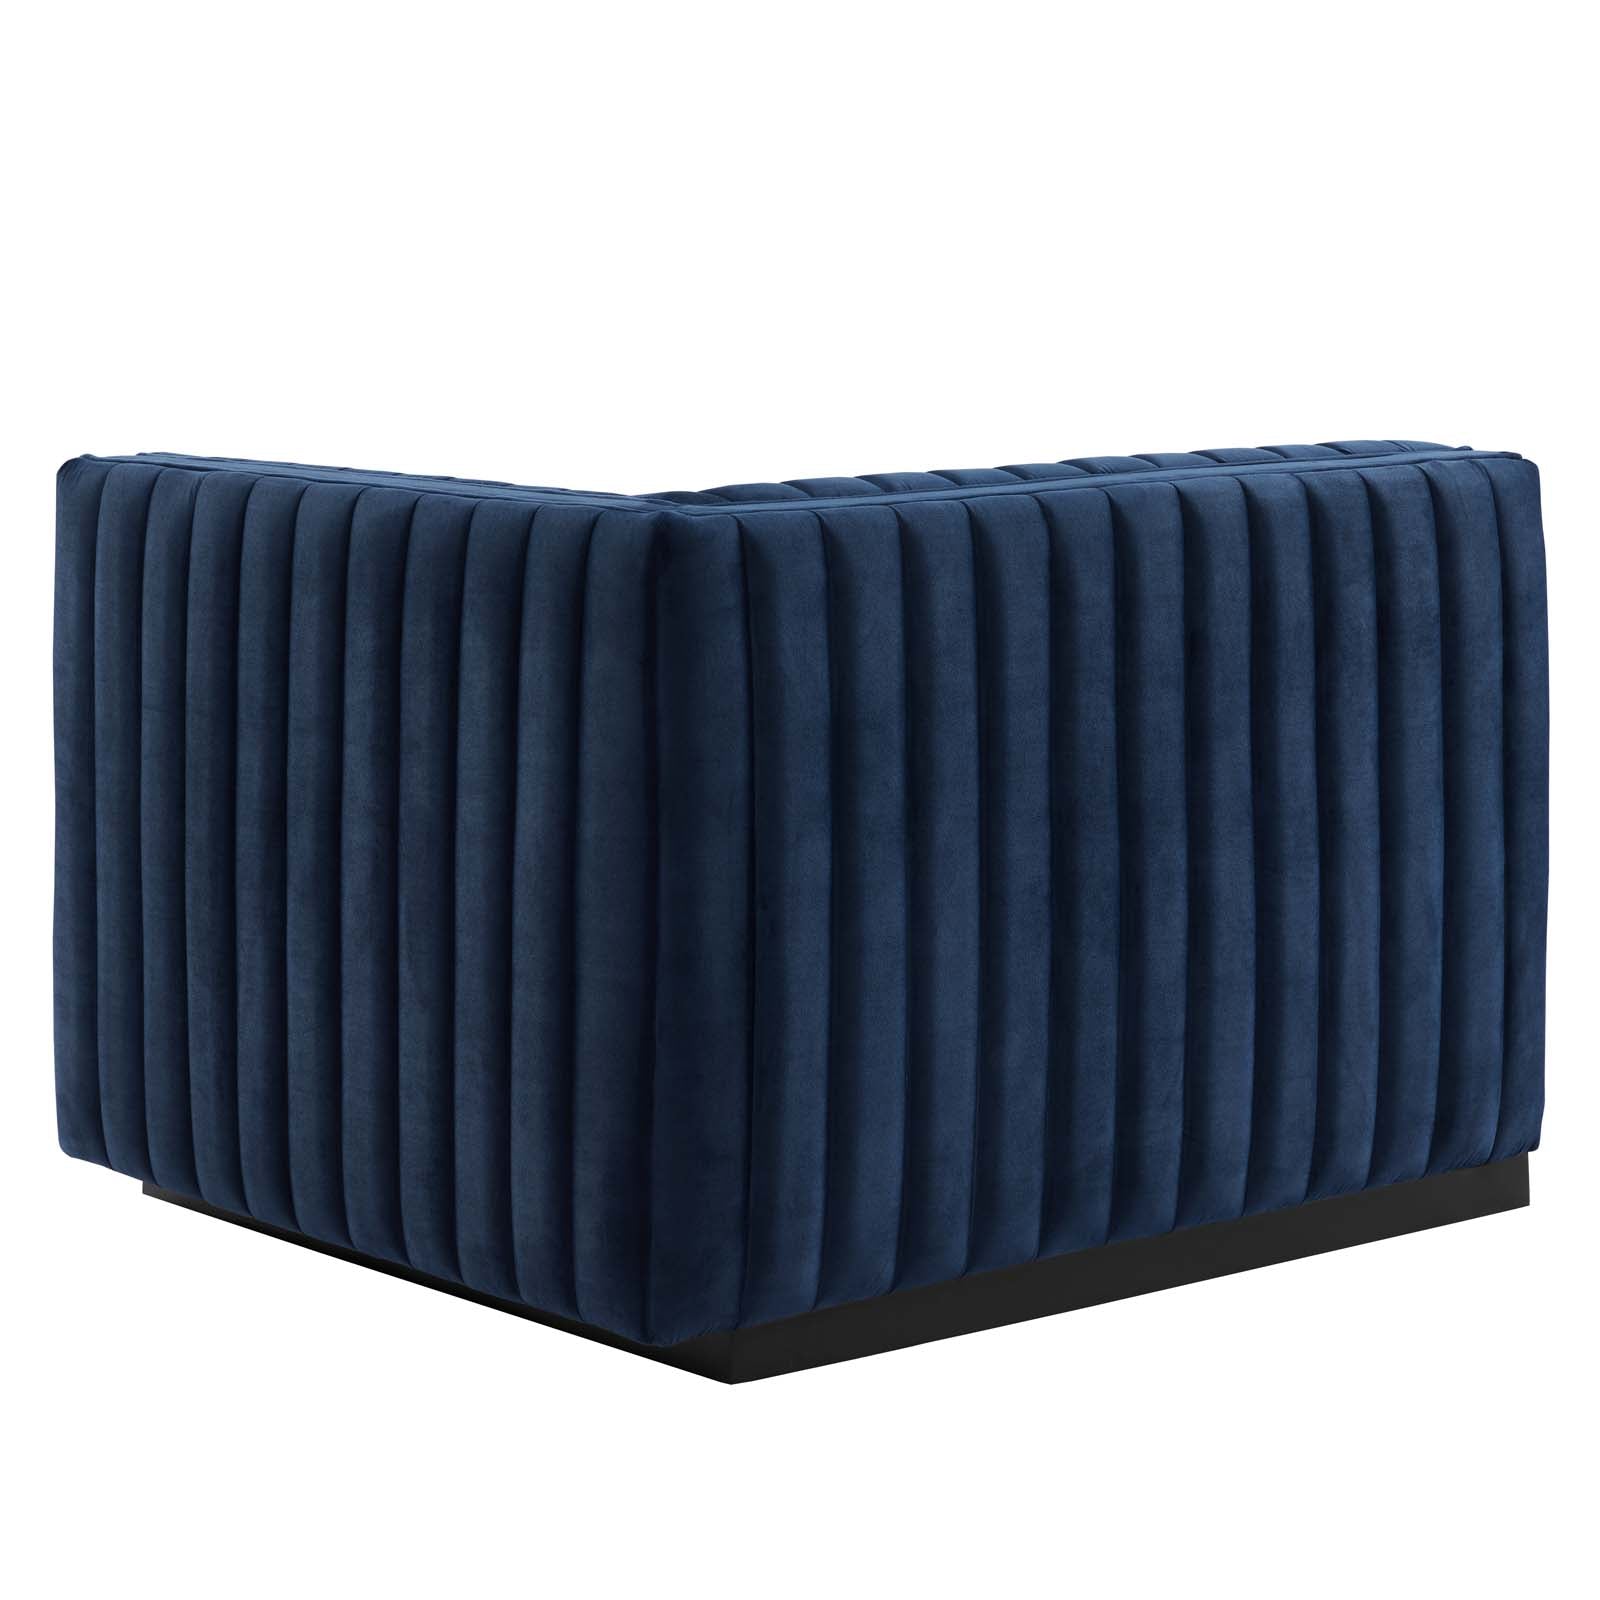 Modway Sectional Sofas - Conjure Channel Tufted Performance Velvet 4-Piece Sectional 28 " H Black Midnight Blue